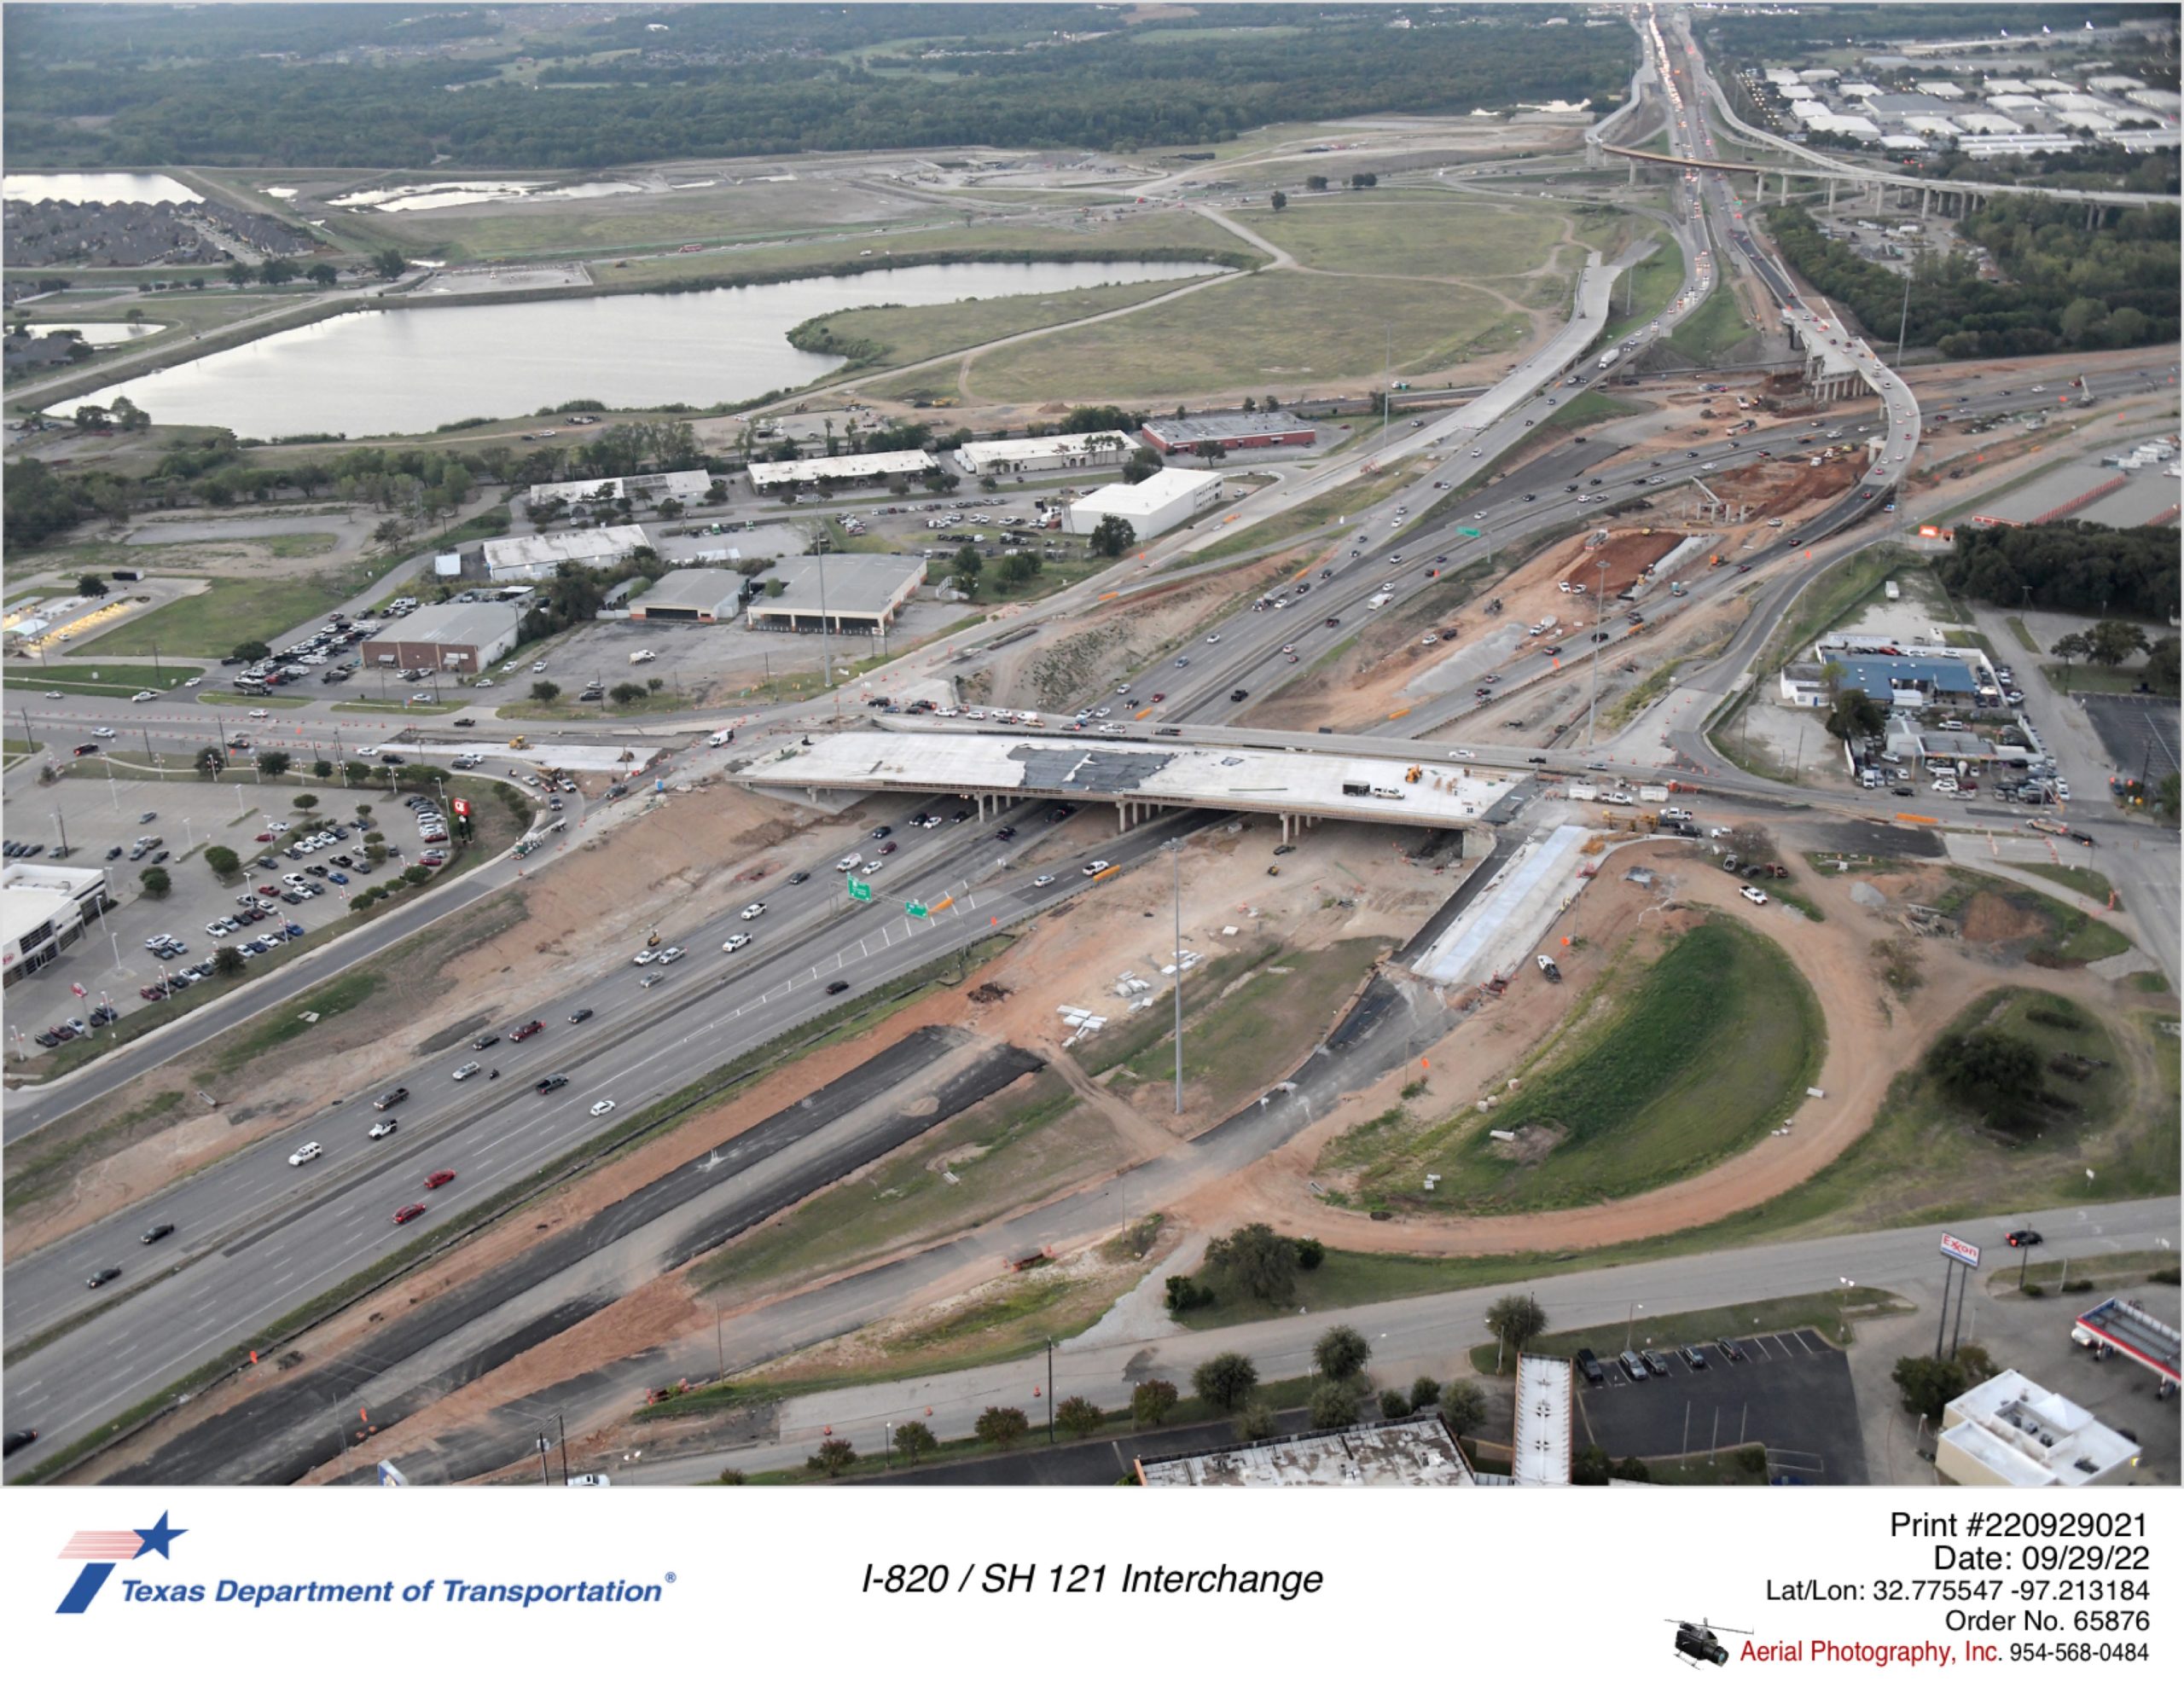 I-820/SH 10 interchange. Construction of main bridge continues and new southbound frontage road construction shown.